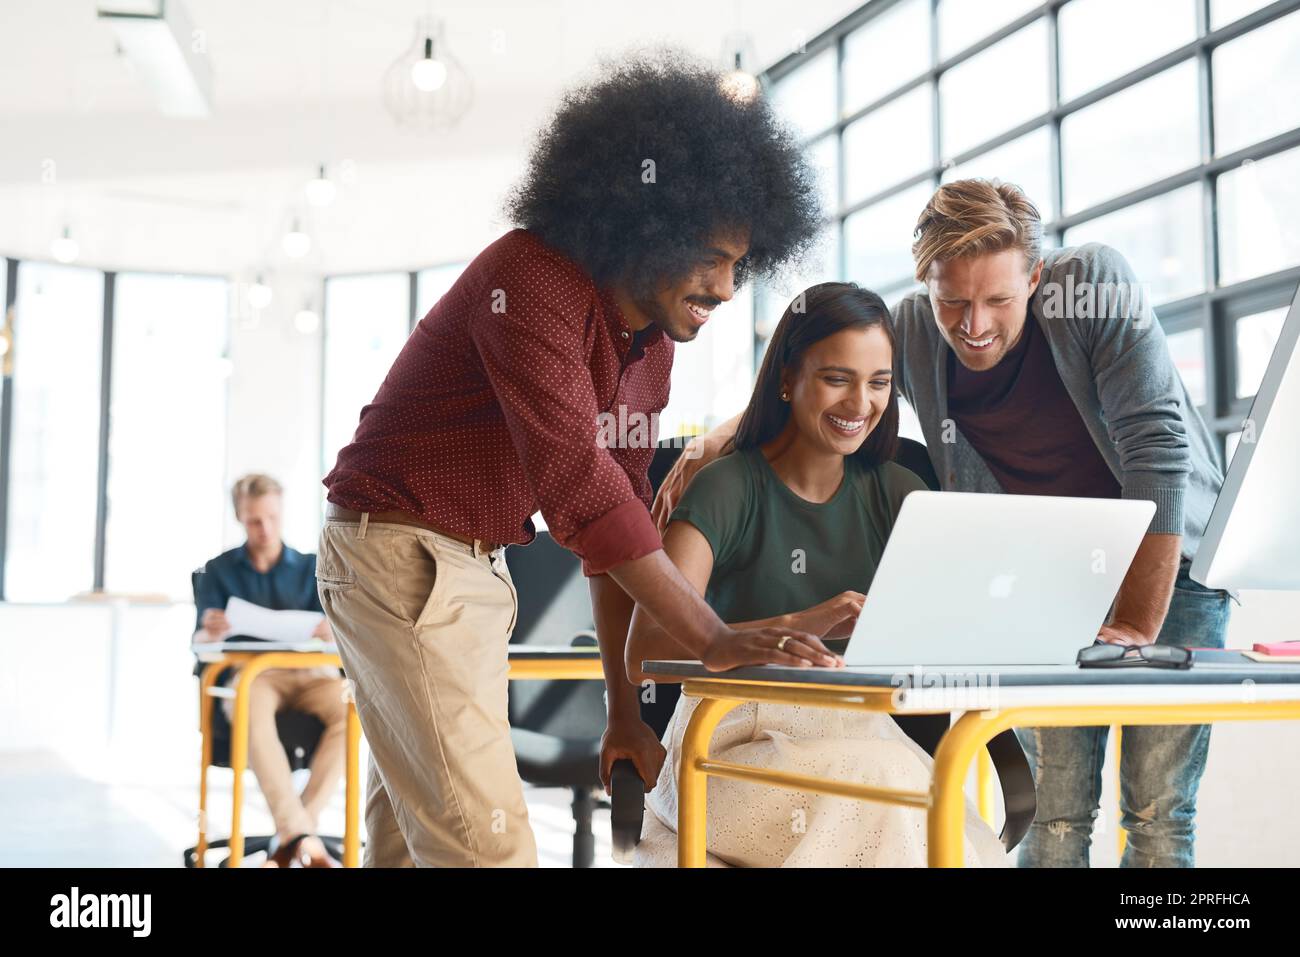 Teamwork brings out their best. a group of creative designers hard at work in their modern office. Stock Photo